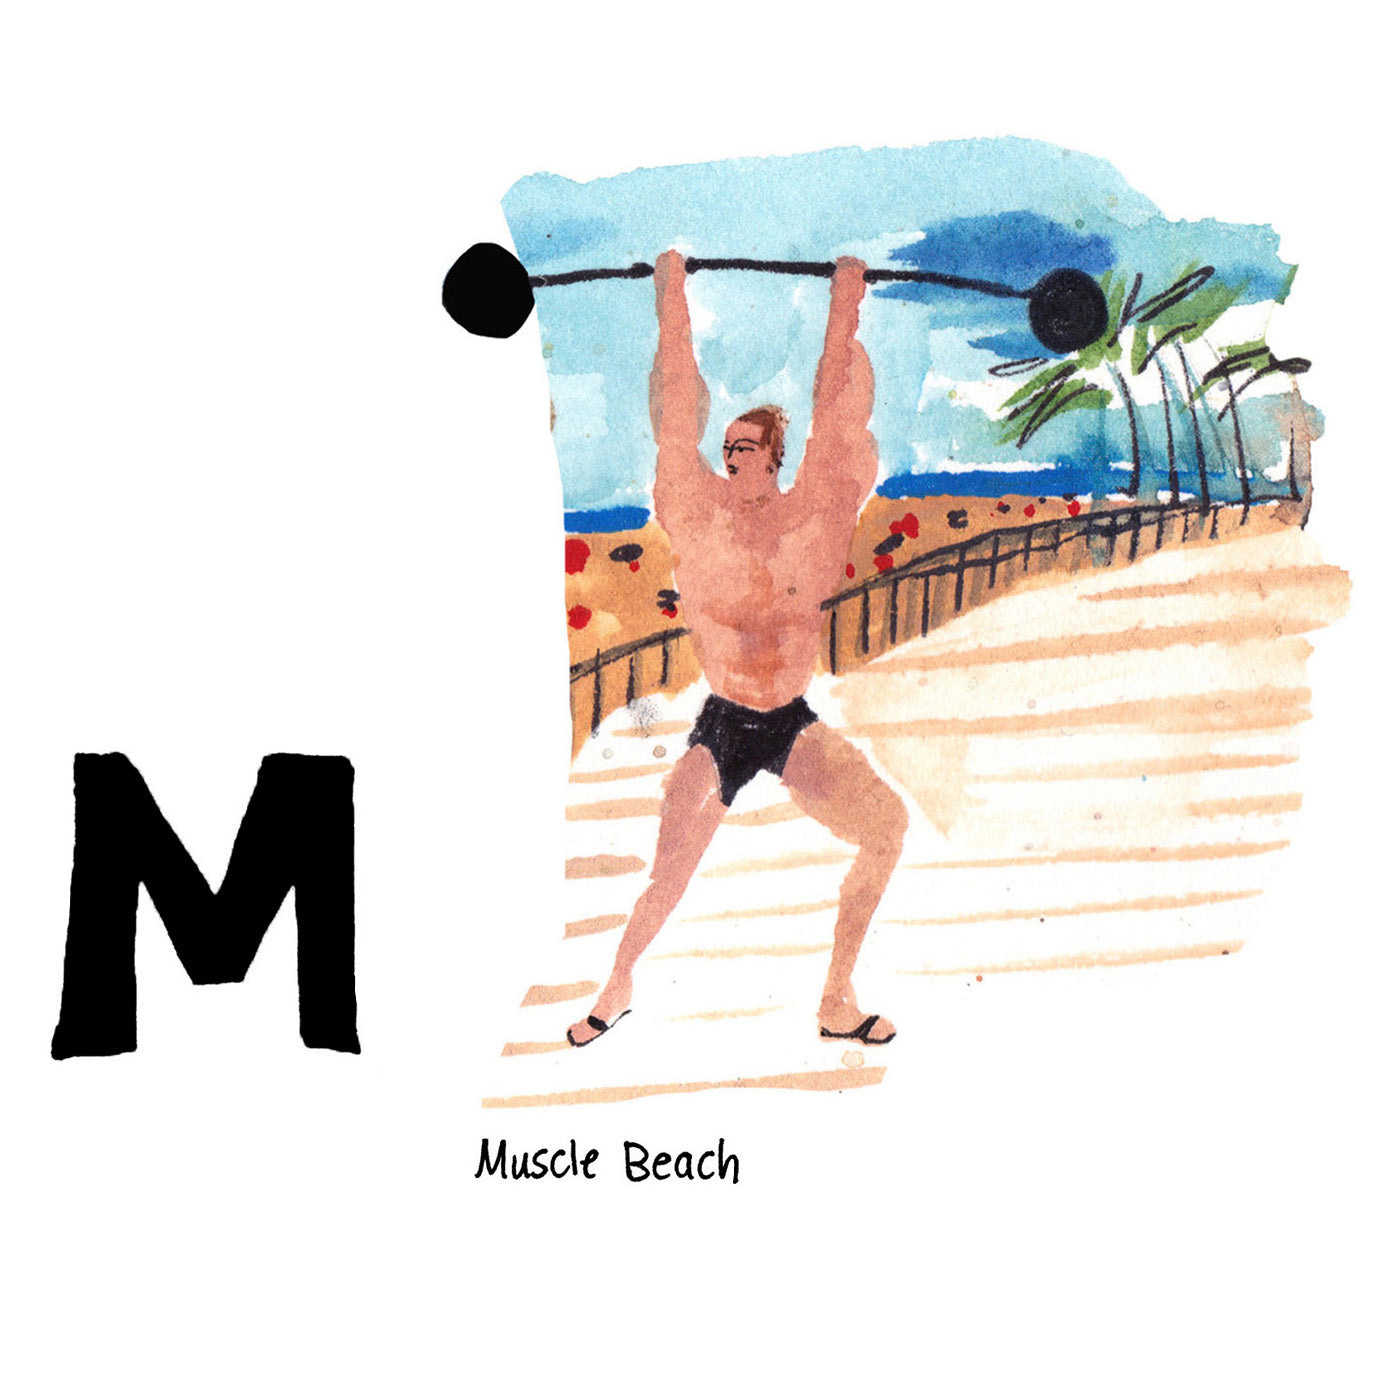 M is for Muscle Beach. This outdoor, seaside gym, stretching along the Santa Monica boardwalk is said to be the birthplace of the physical fitness boom that hit the United States in 1933. 